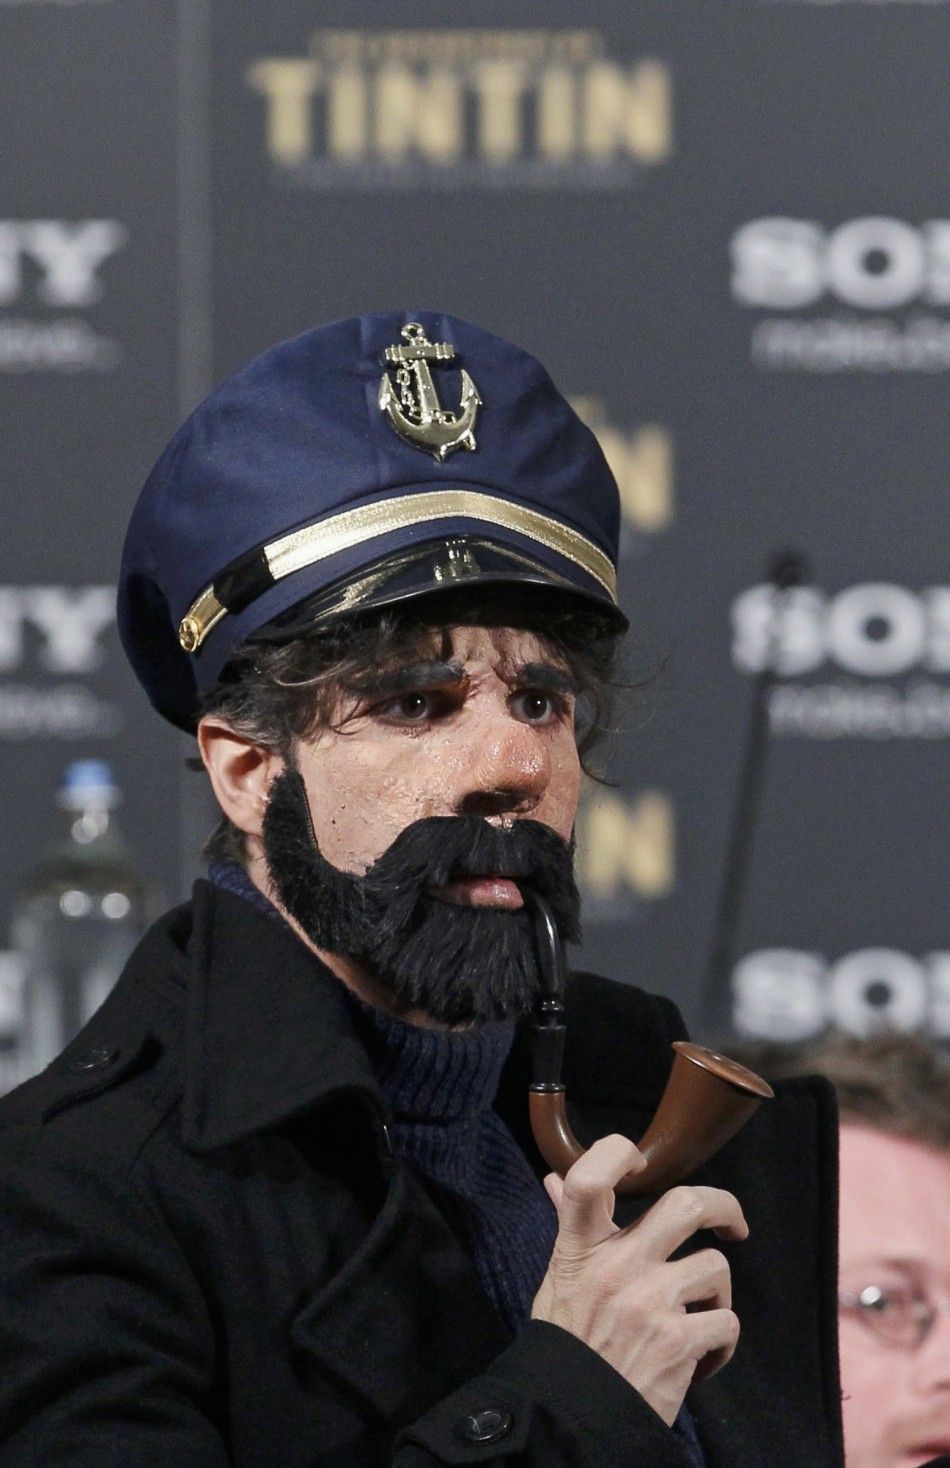 Cast member Daniele Rizzo is dressed as Captain Haddock, his role in the new Tintin movie, in Brussels